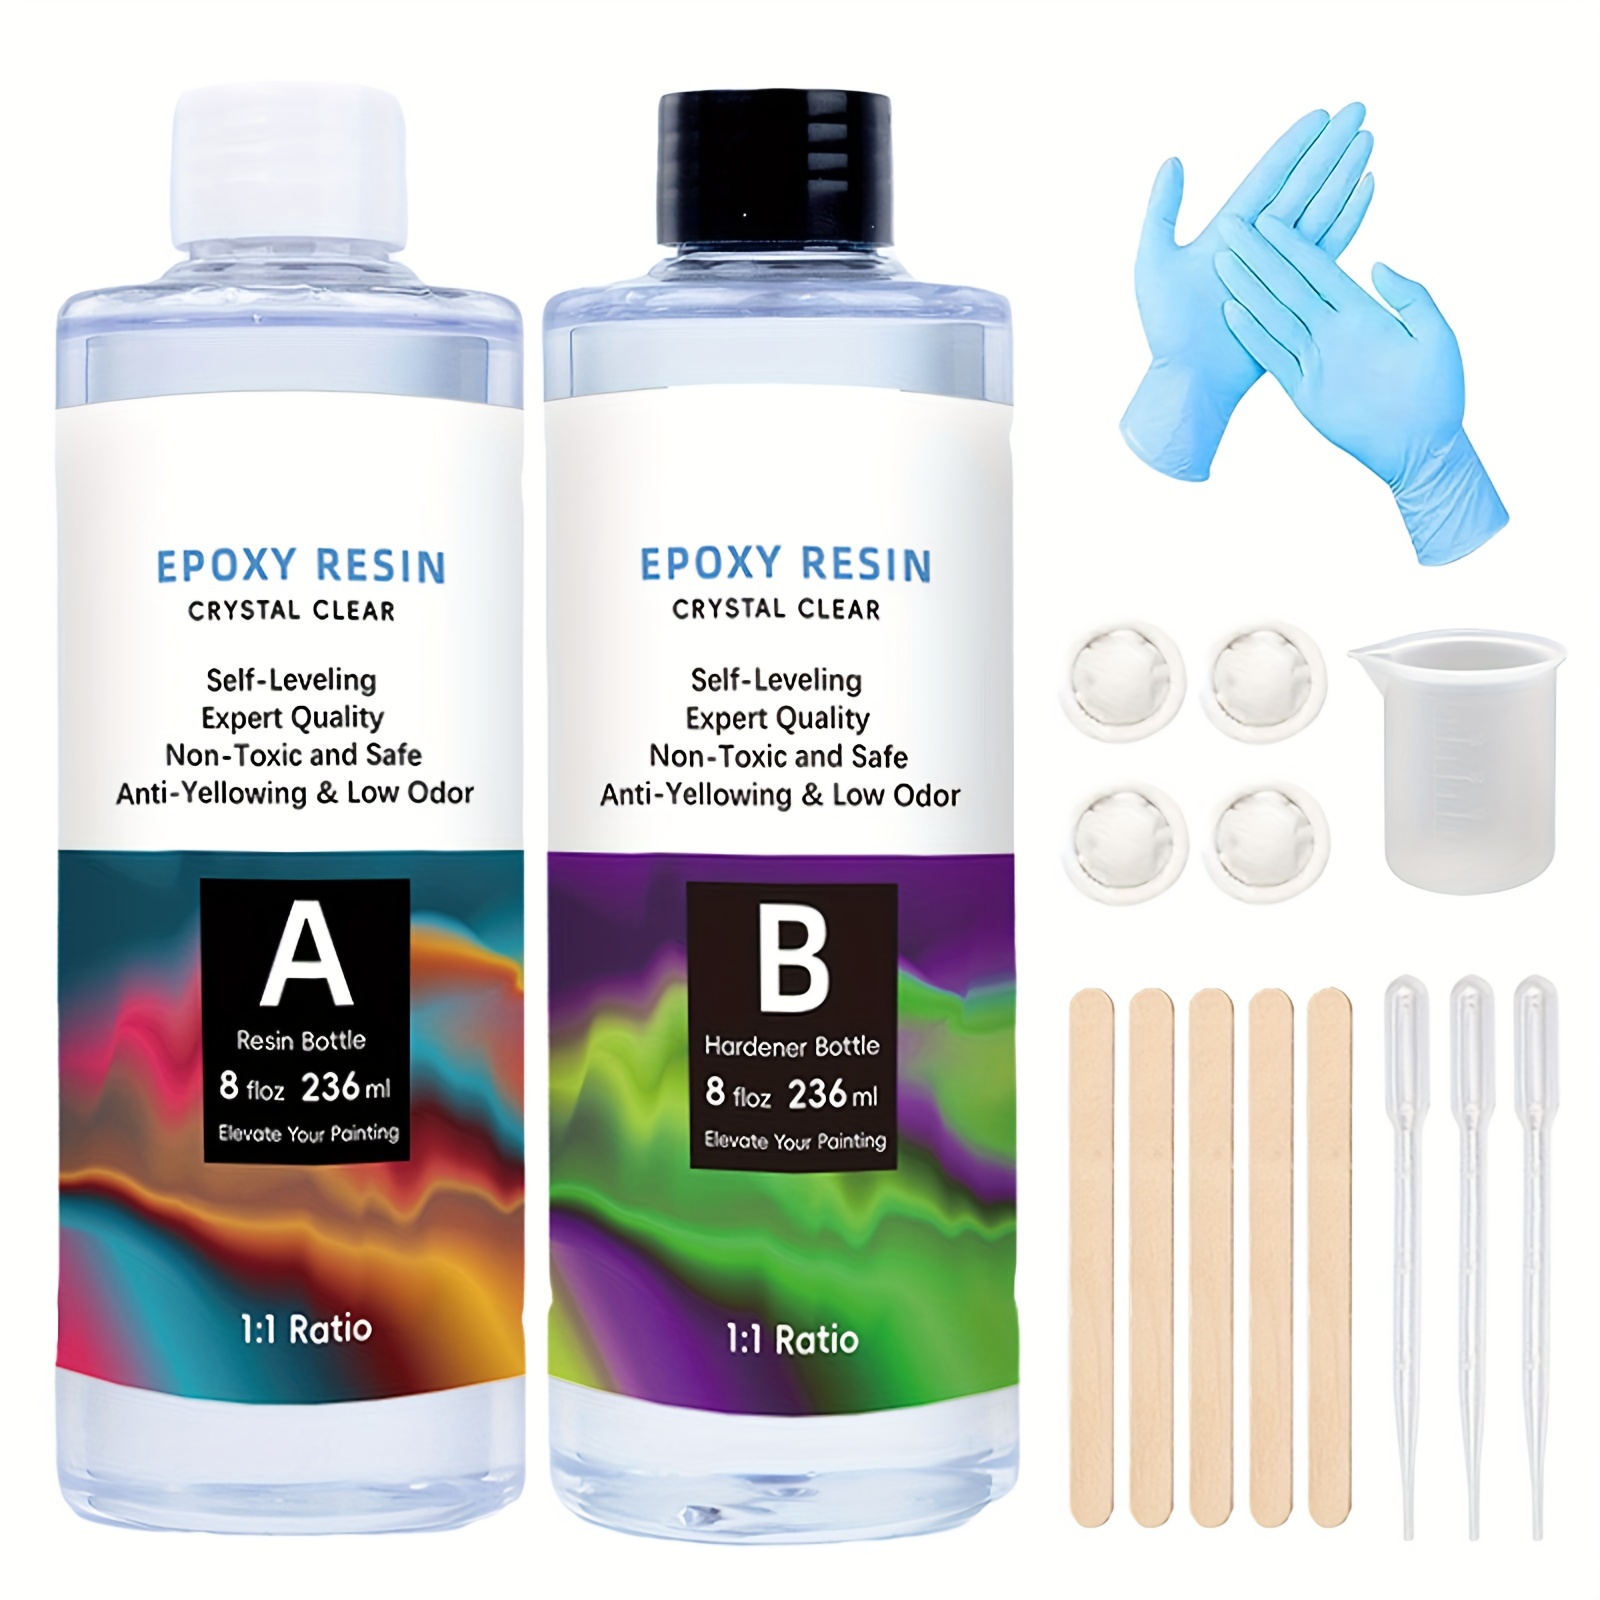 Epoxy Resin Crystal Clear Kit, Super Anti-Yellowing Craft Resin Epoxy  32OZ(16OZ Resin and 16OZ Hardener) for Art, Jewelry Making, Casting,  Silicone